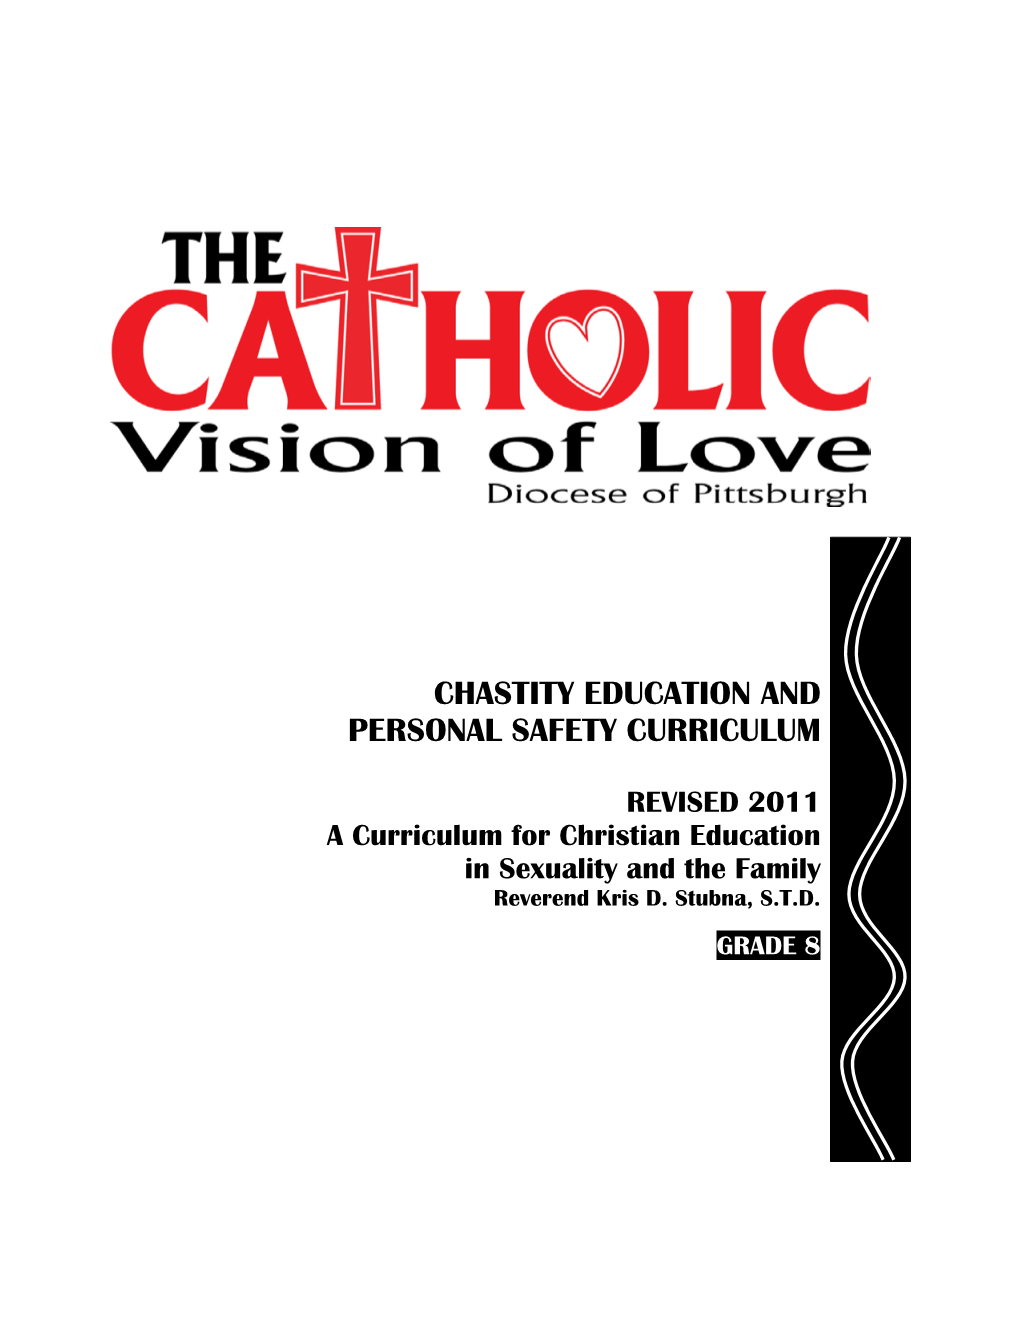 Chastity Education and Personal Safety Curriculum